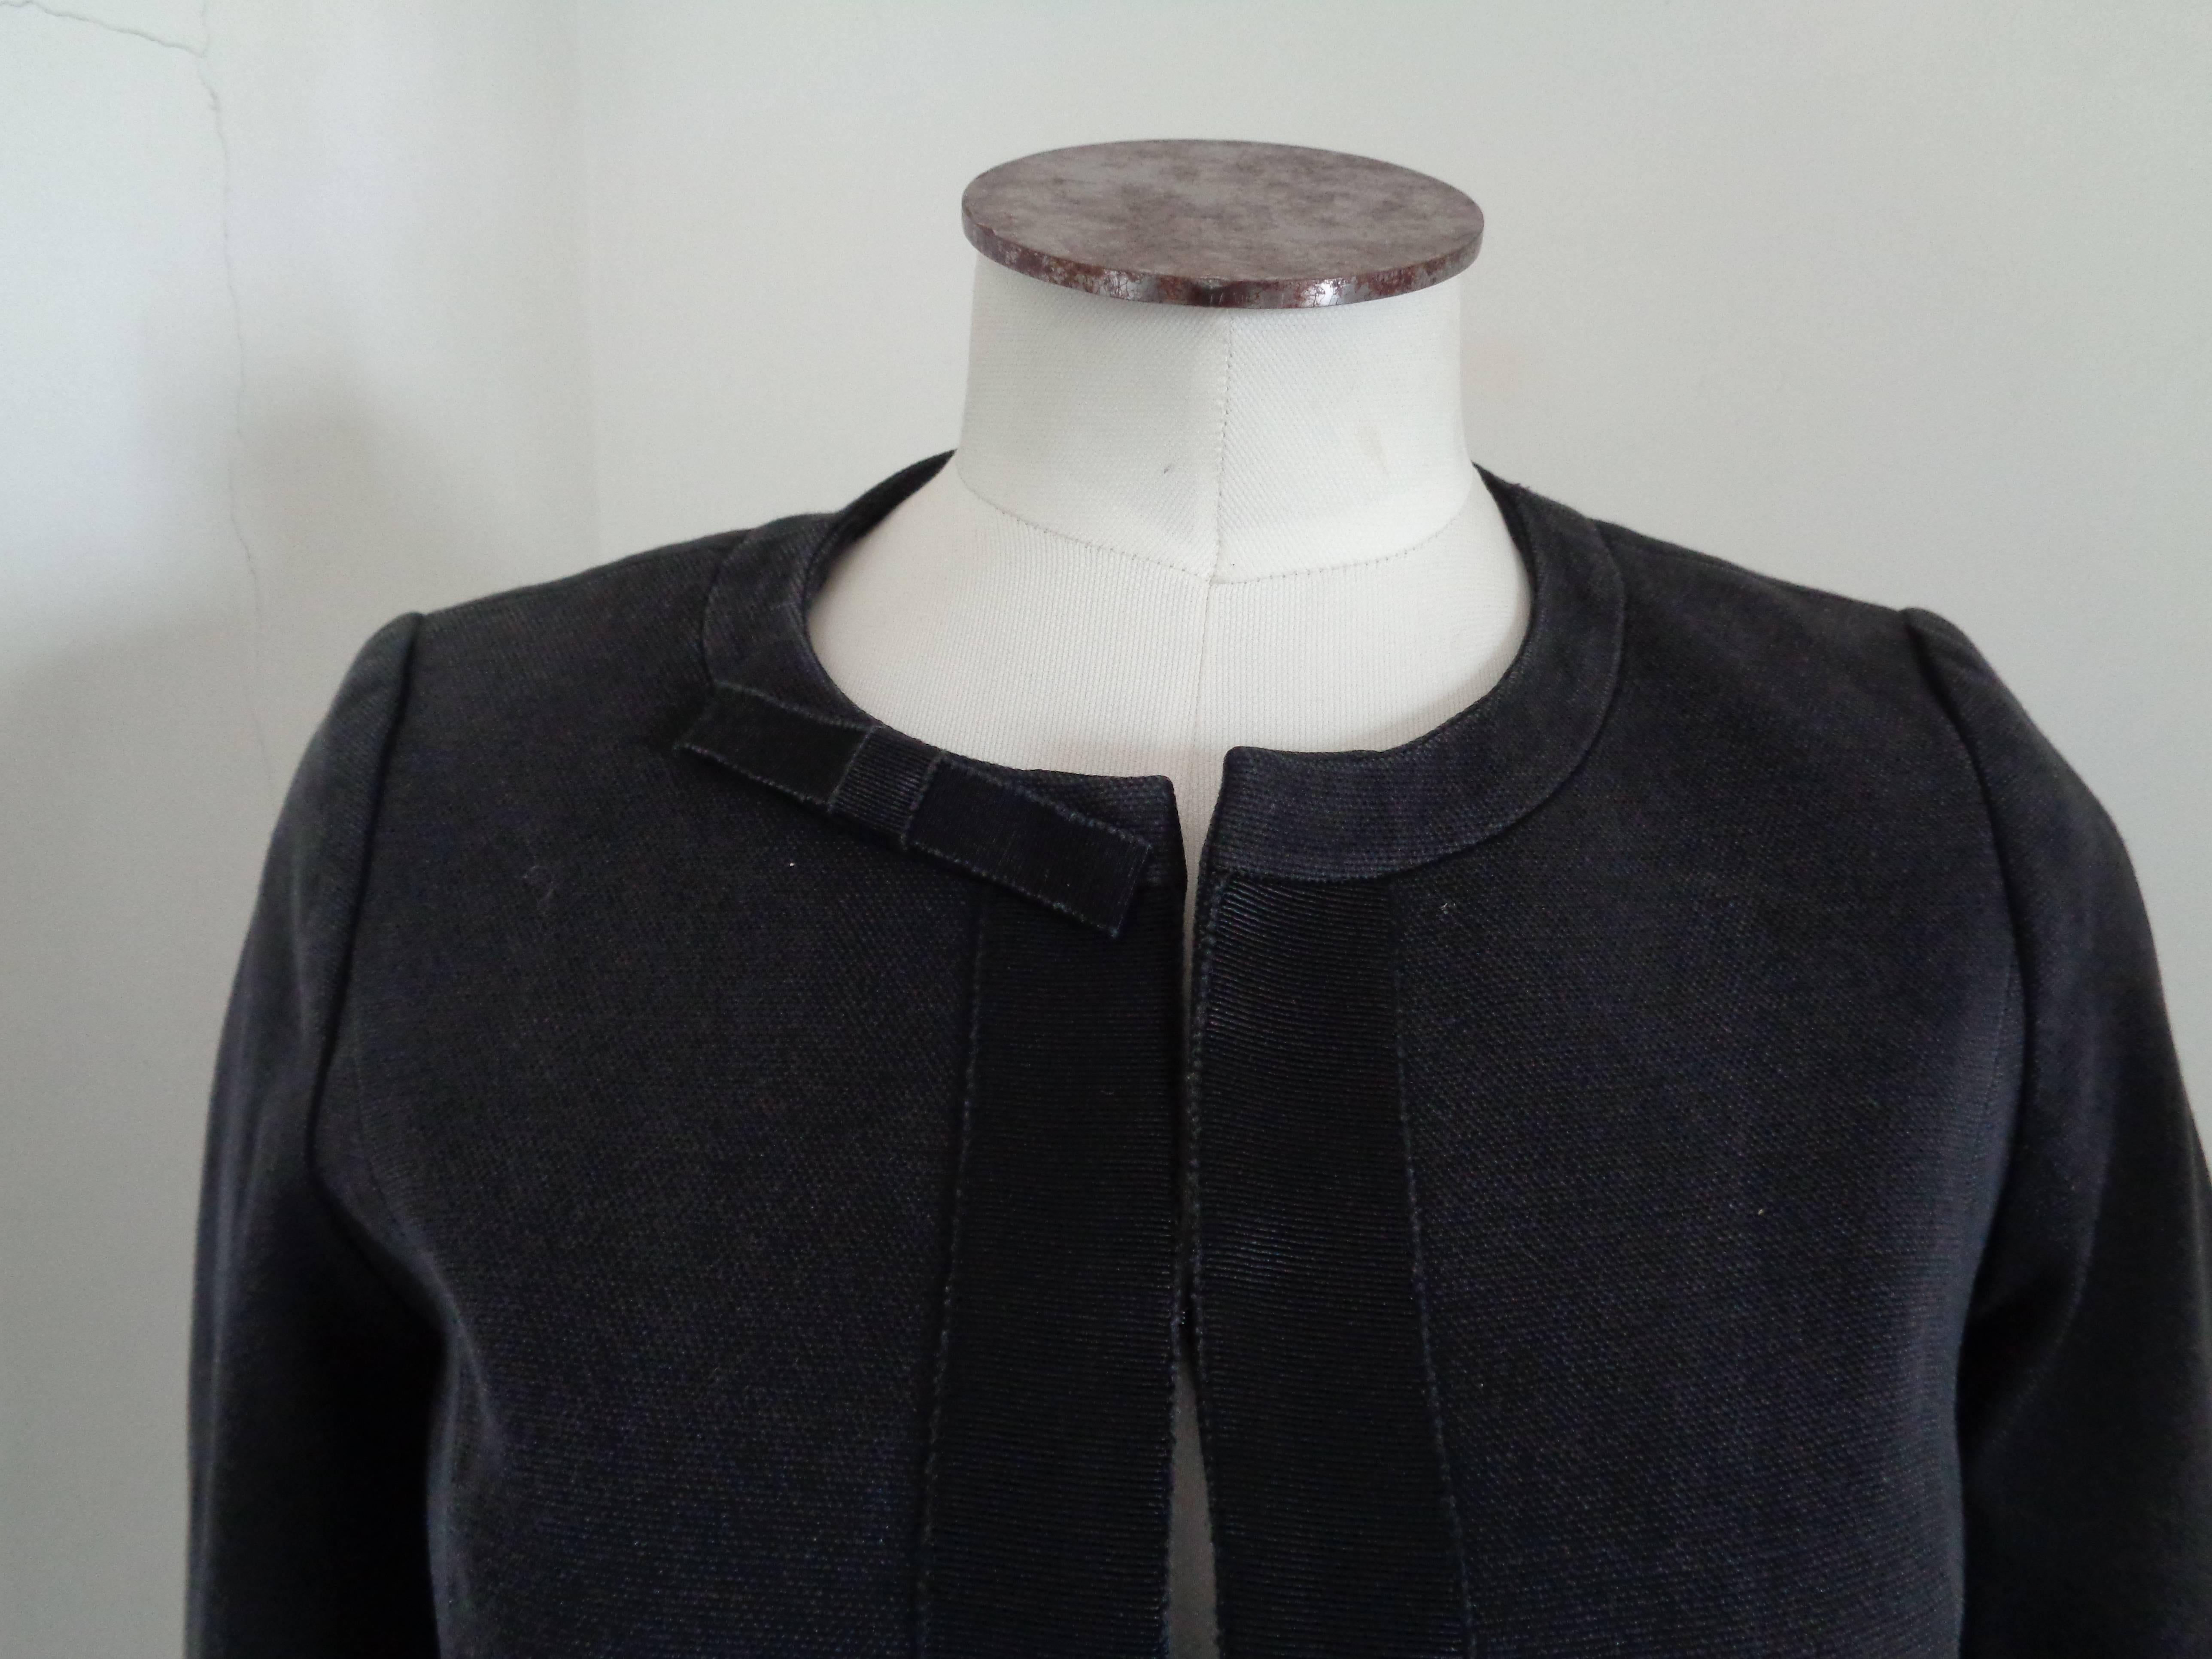 Louis Vuitton Black Cotton Jacket

Louis Vuitton uniform black jacket totally made in france in size 34 which corresponds to a 38 italian standard size

Composition: Cotton and others
